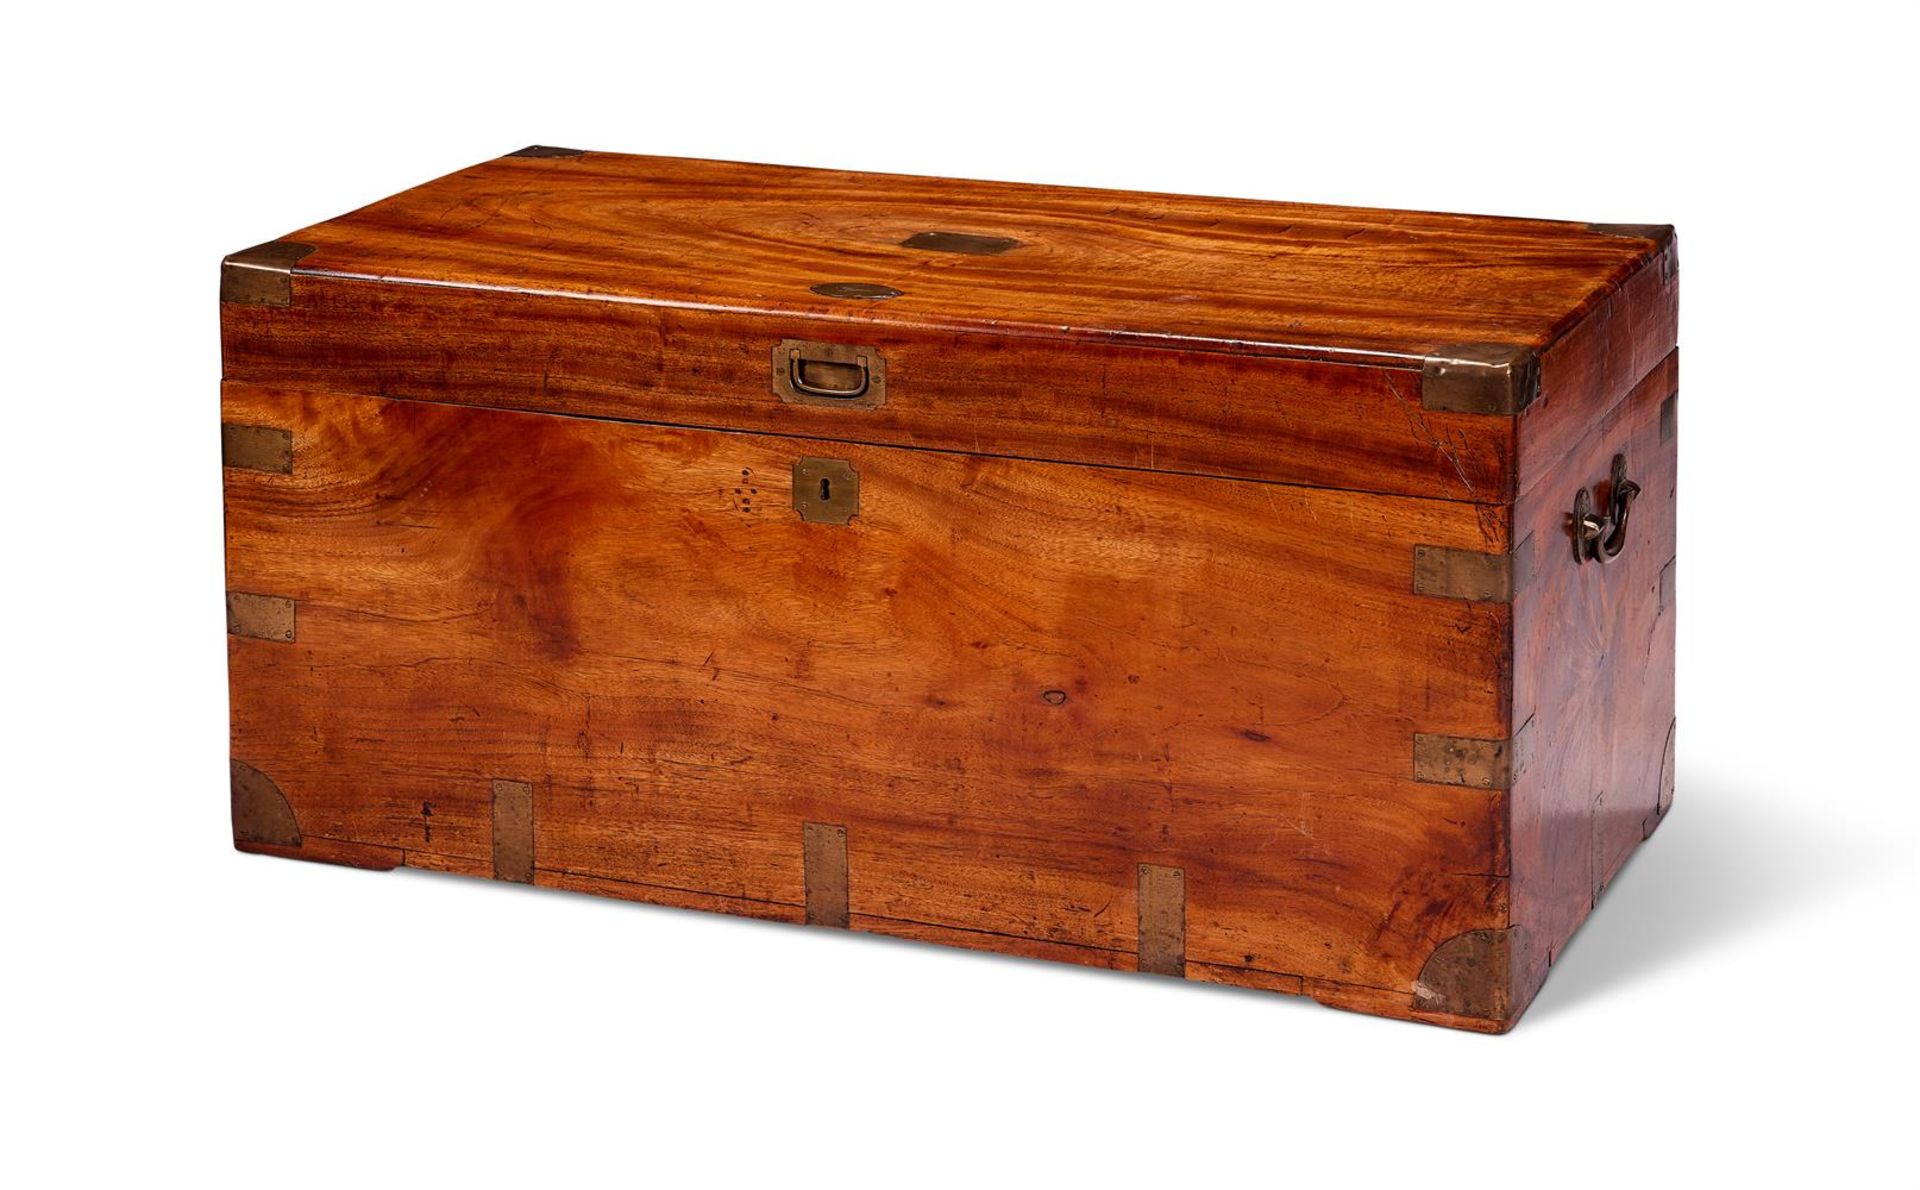 A VICTORIAN CAMPHOR WOOD AND BRASS BOUND CAMPAIGN TRUNK, MID 19TH CENTURY